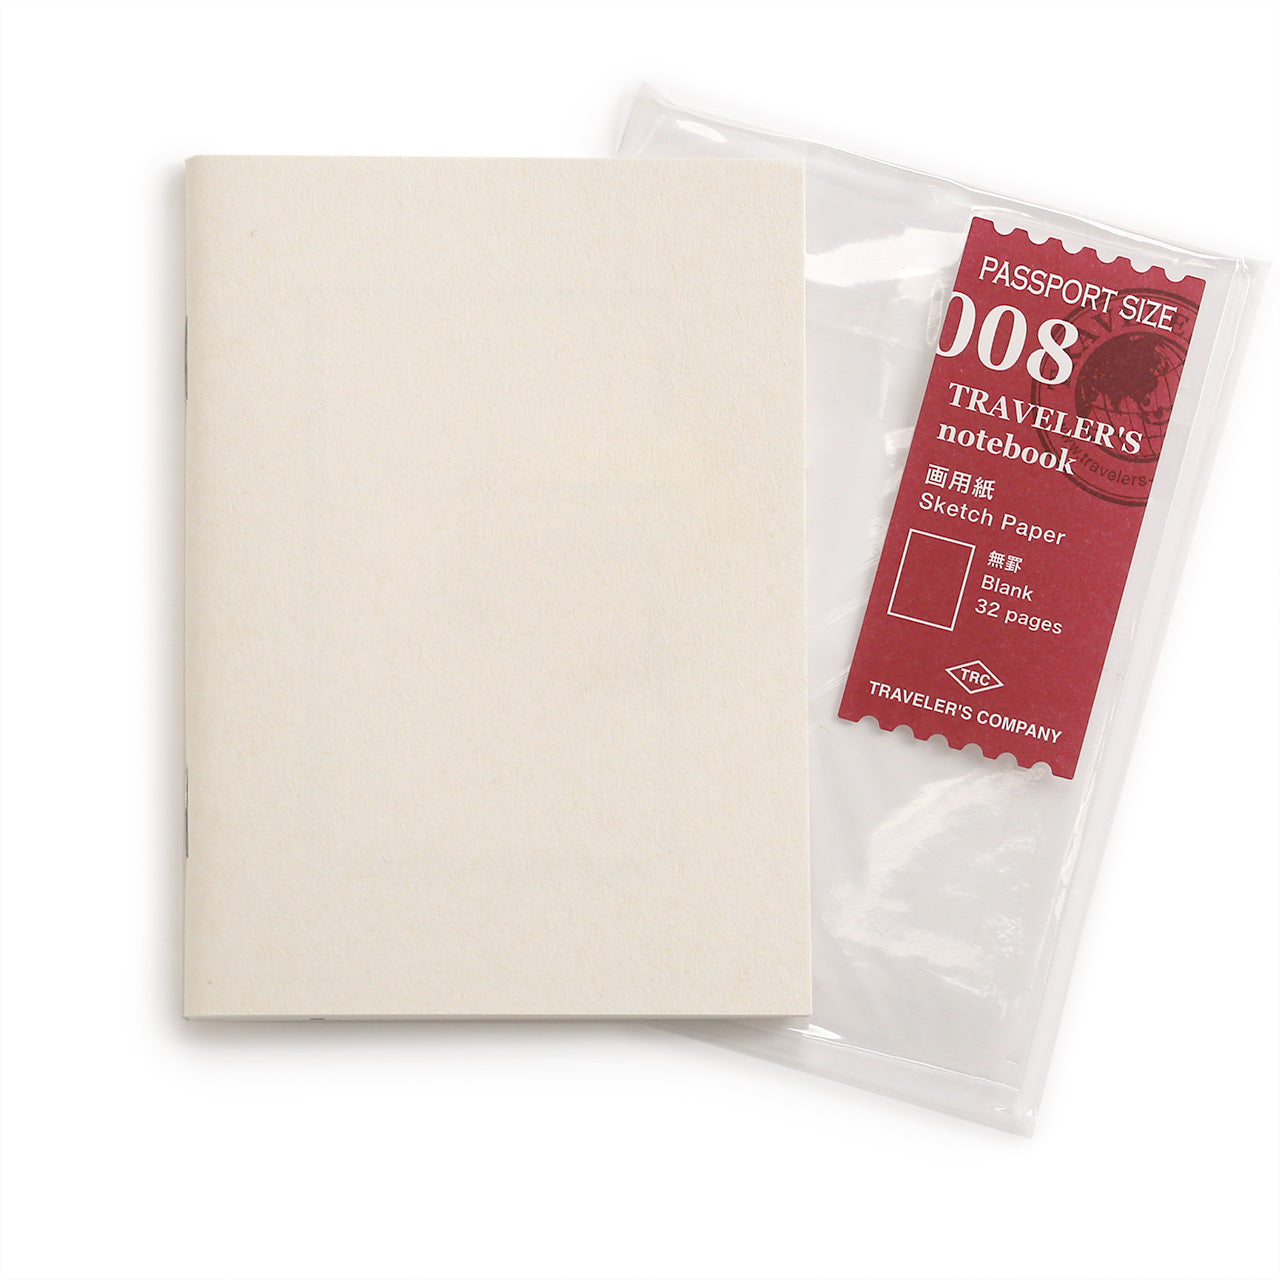 008 blank sketch paper refill notebook passport size with dark red label